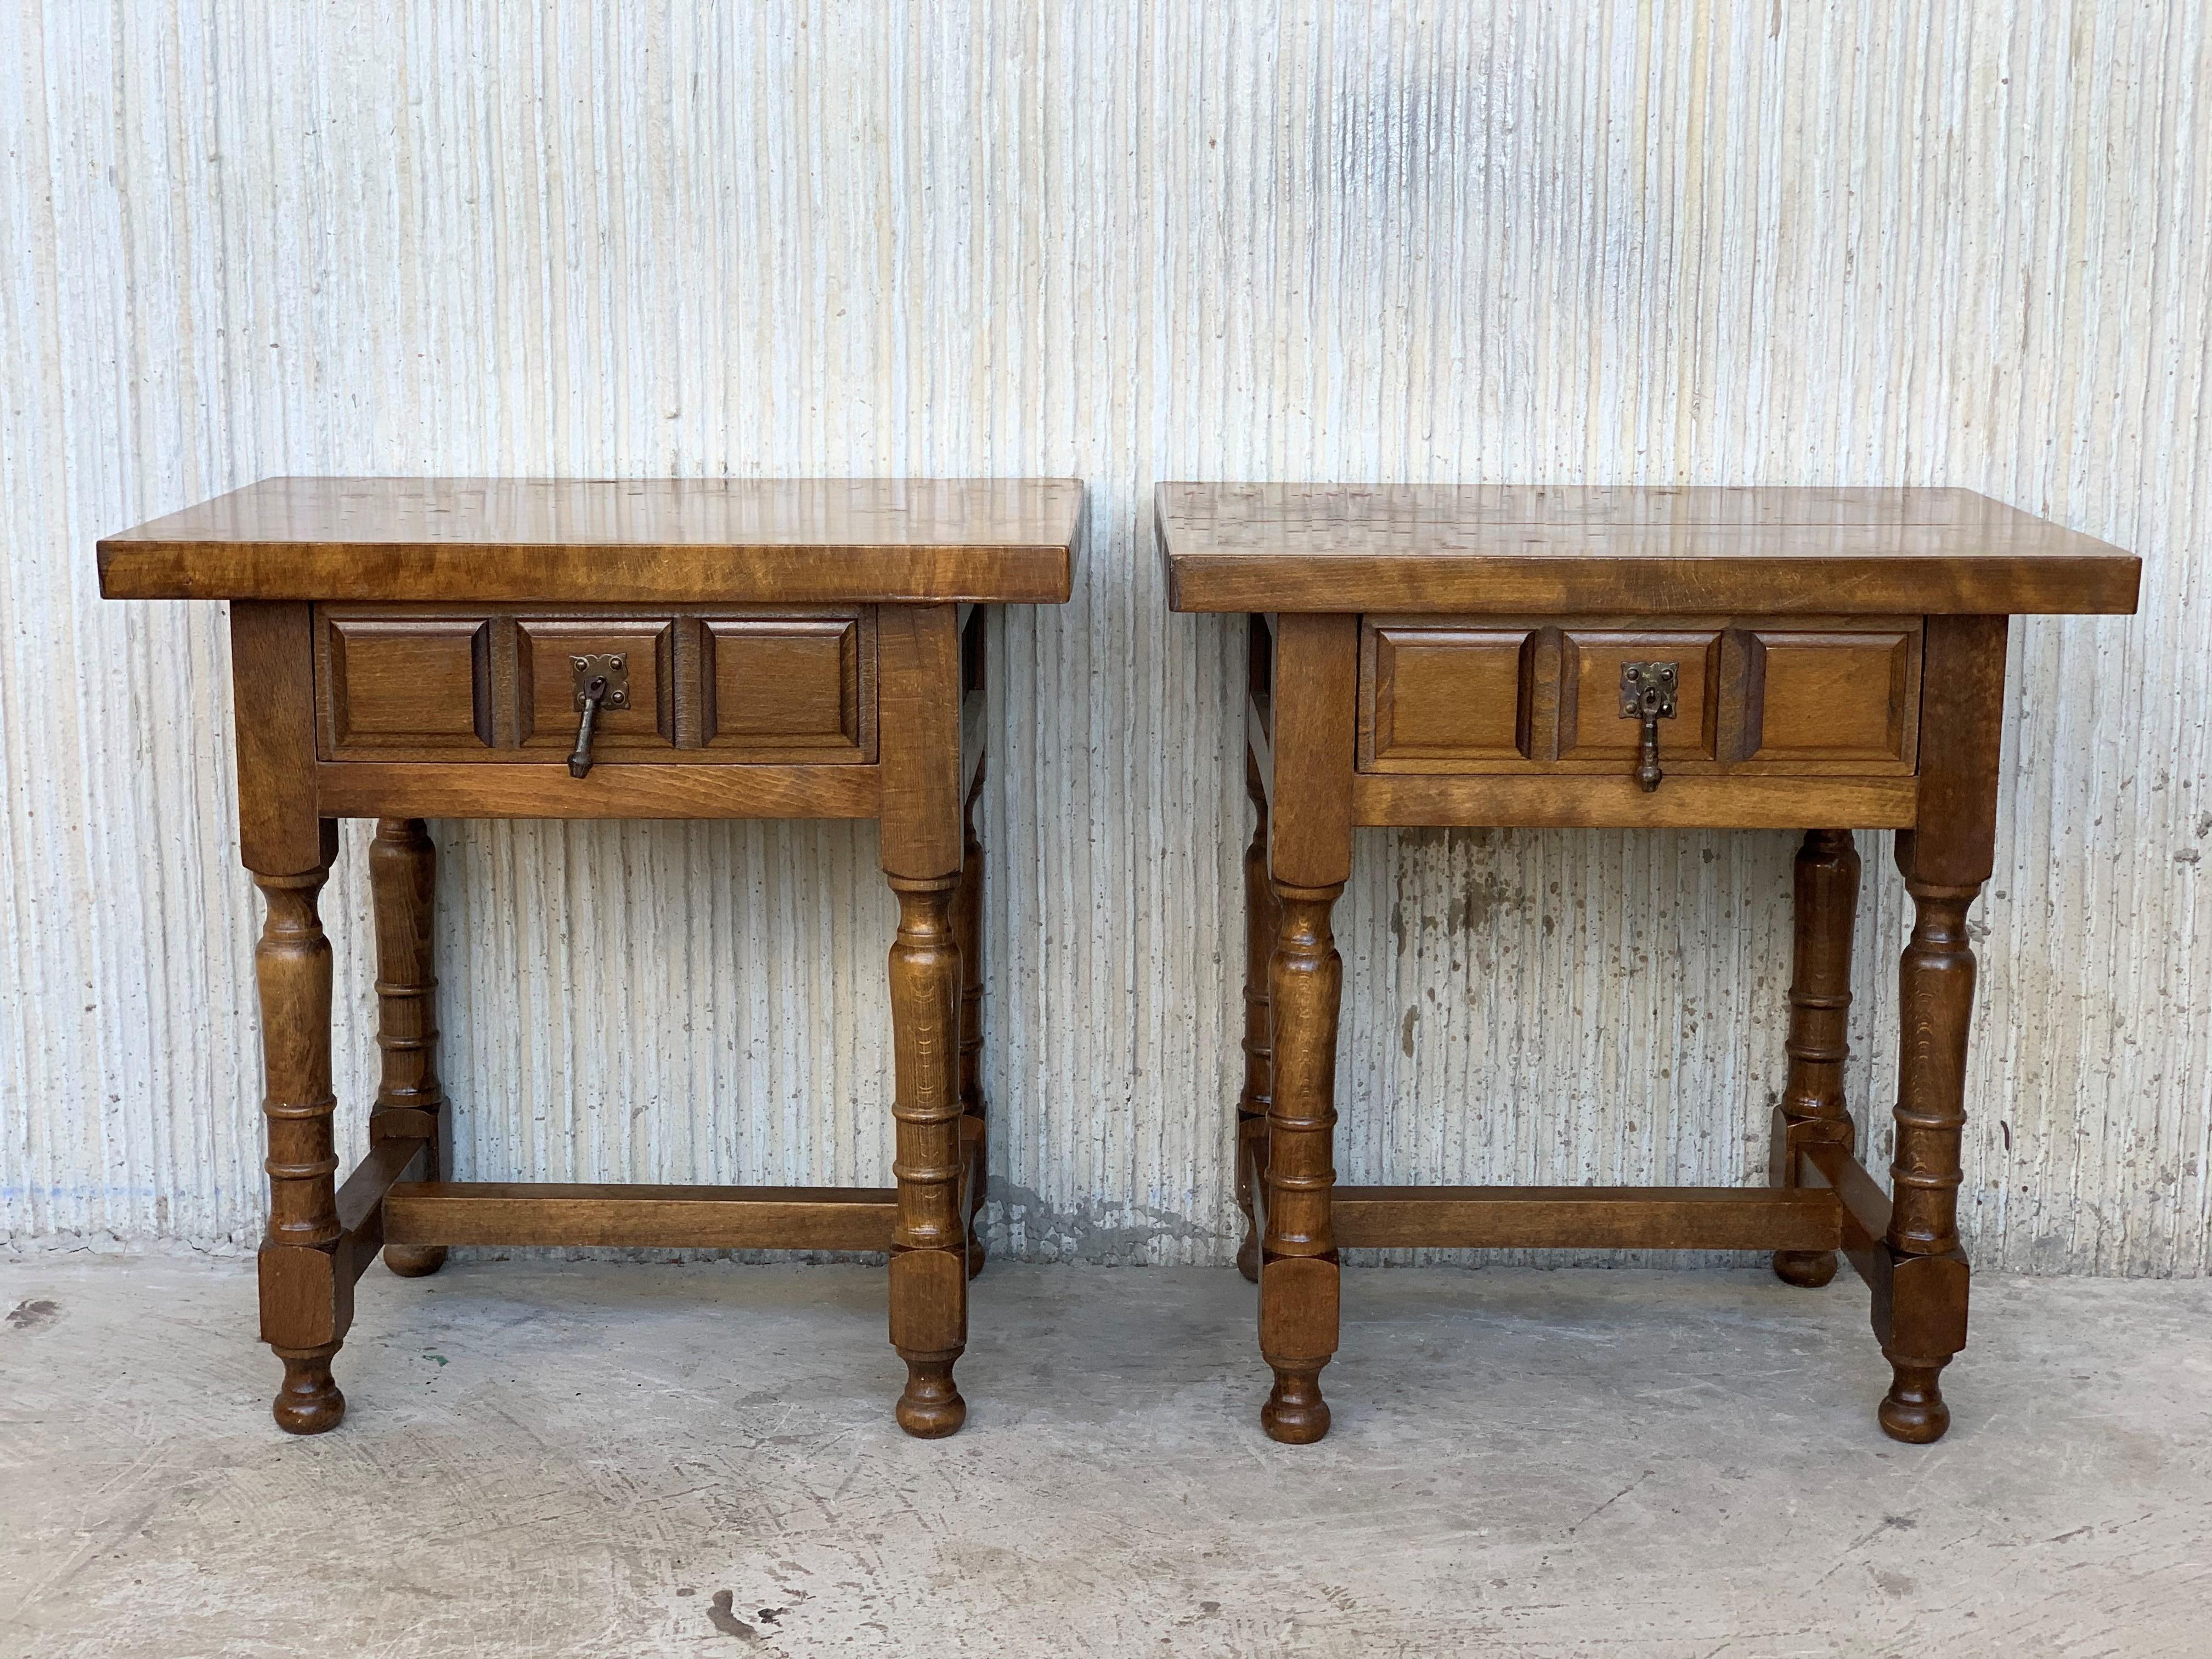 20th century pair of Spanish nightstands with carved drawer and iron hardware.
Beautiful tables that you can use like a night stands or side tables, end tables... or table lamp.